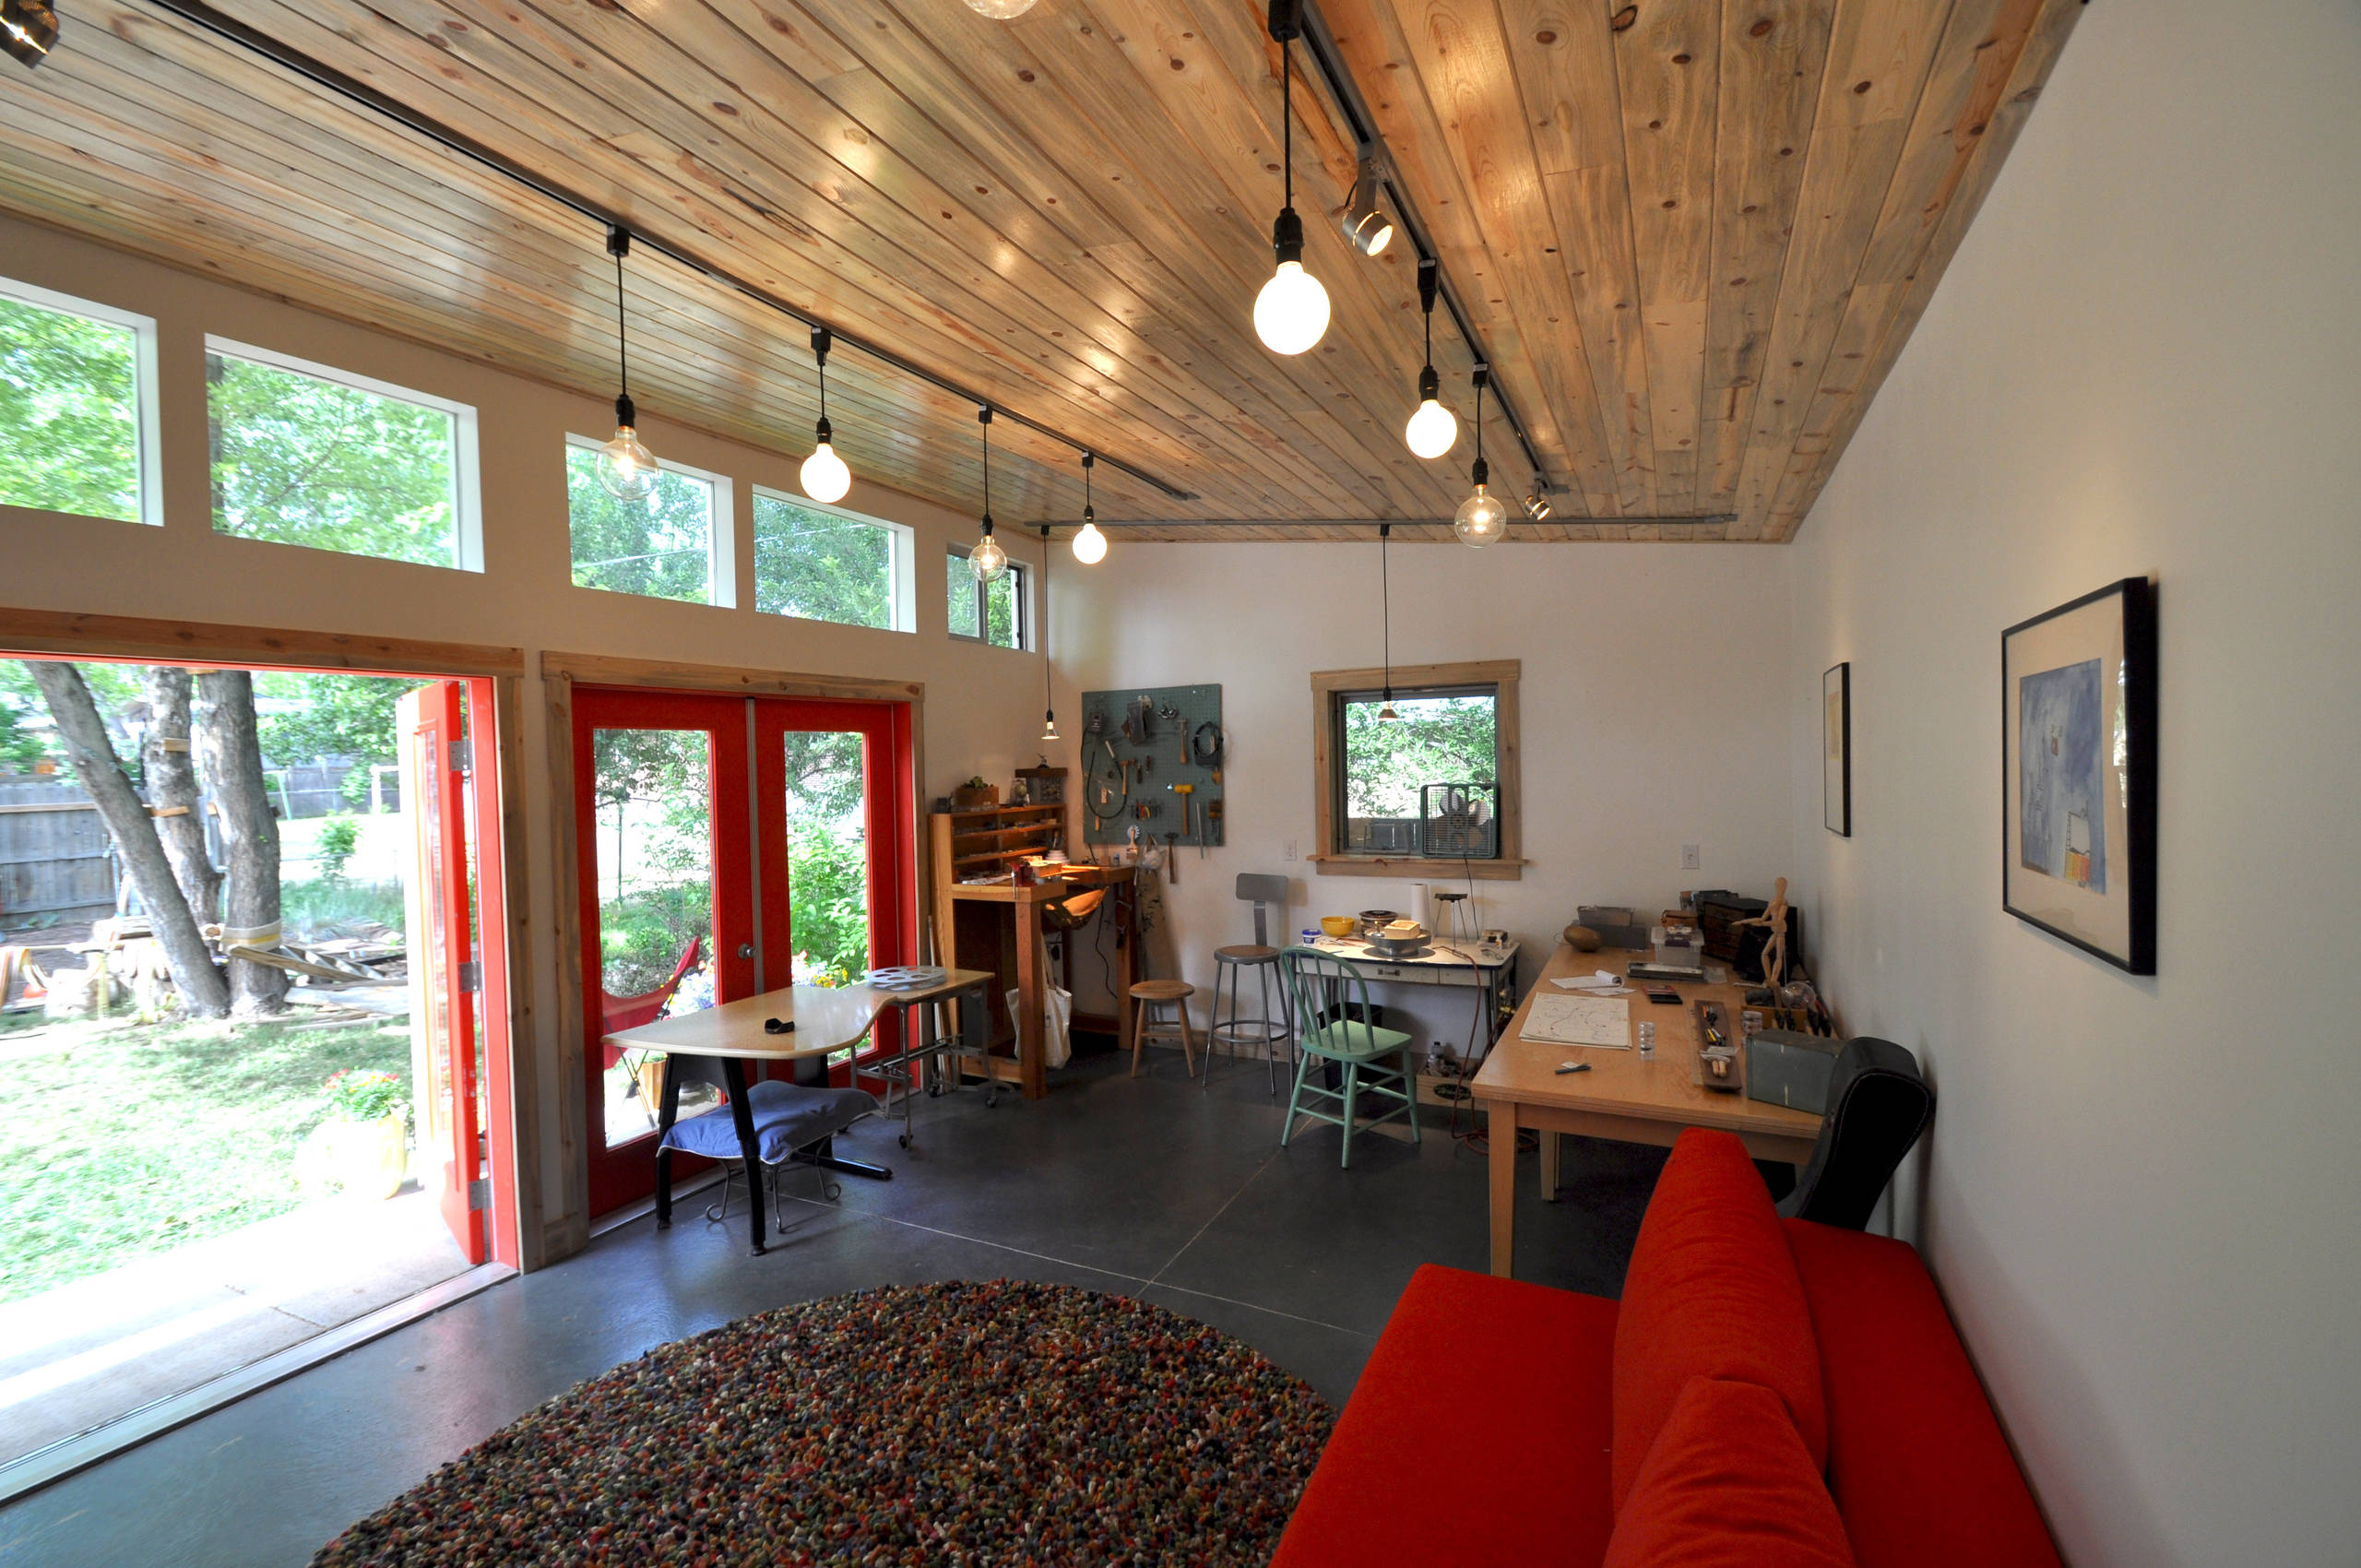 Guest and Art Studio with Garage: Studio Shed Lifestyle - Contemporary -  Home Office - Denver - by Studio Shed - Live Large. Build Small. | Houzz